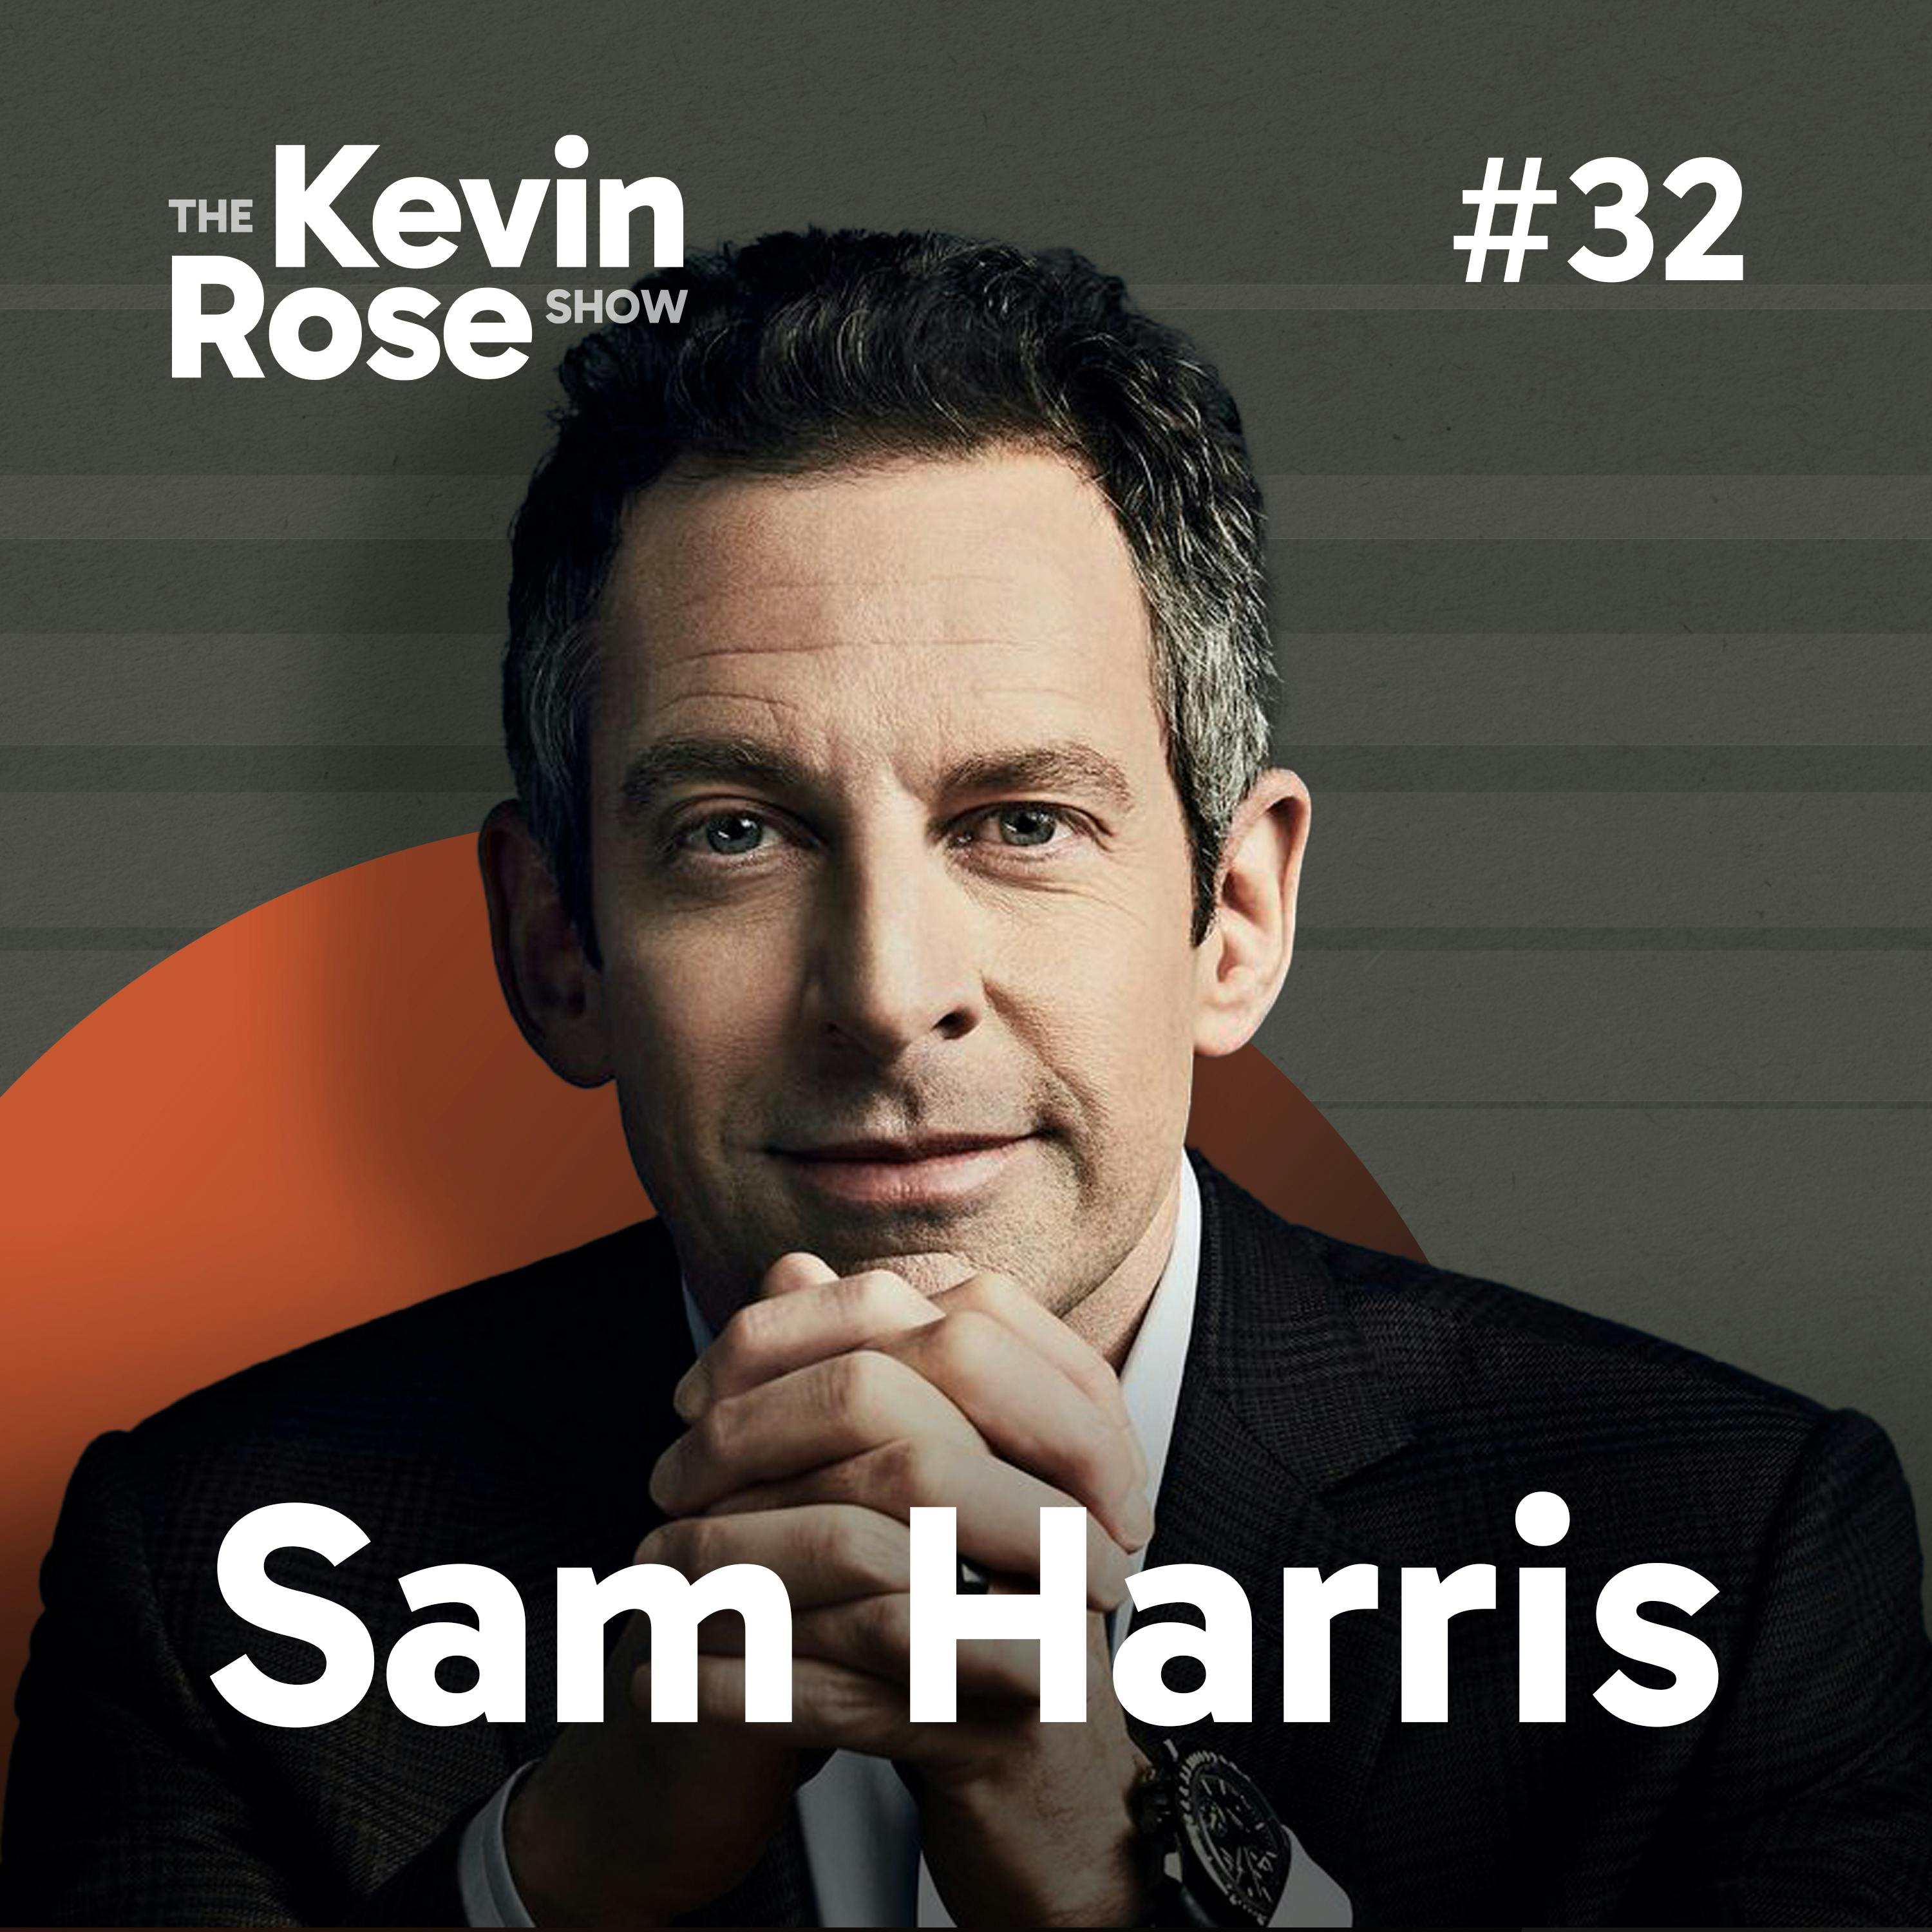 Sam Harris, Enlightenment, Real Meditation, and Consciousness Explained (#32)